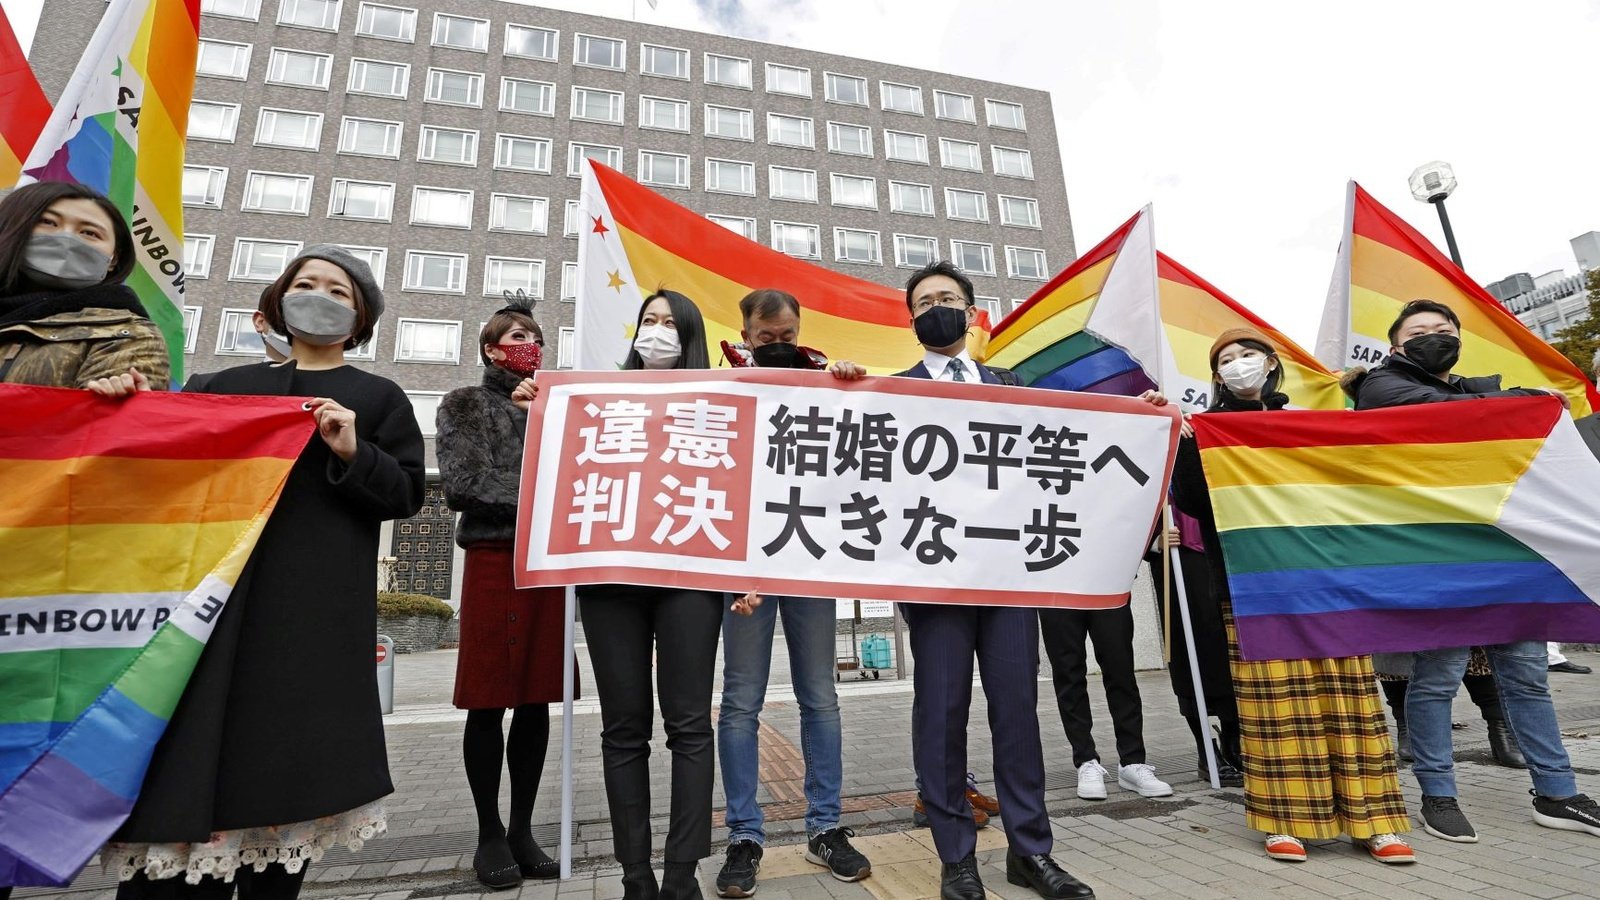 Japanese Court Puts Same-Sex Marriage on the Nations Agenda Council on Foreign Relations